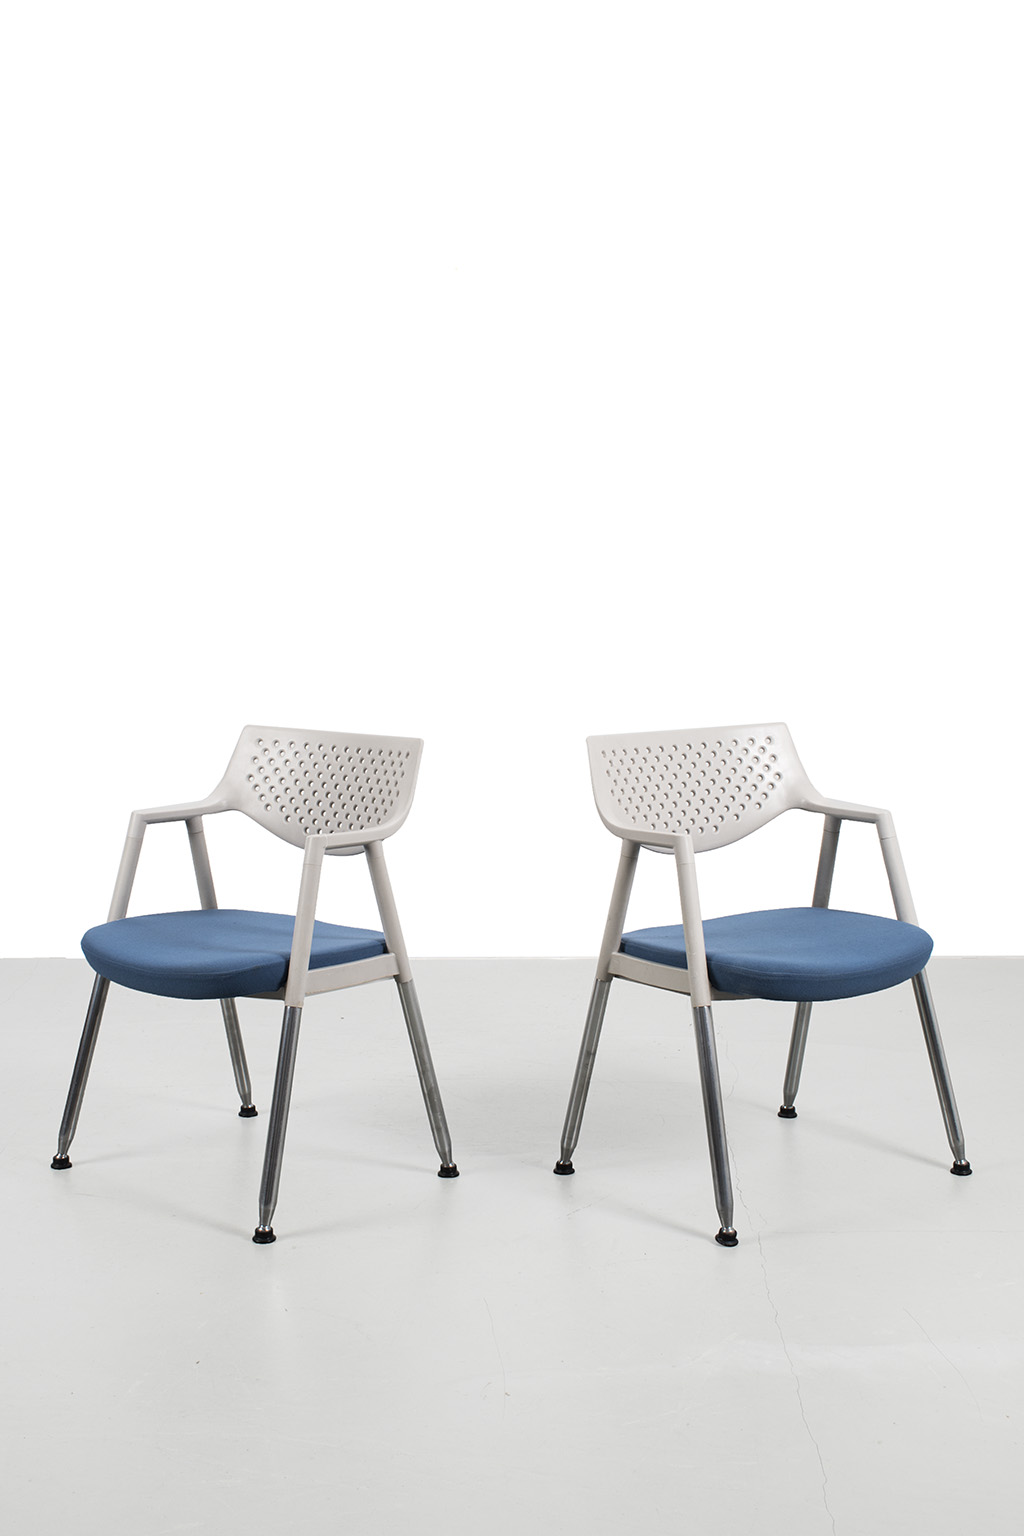 Pair of Vitra chairs with armrests